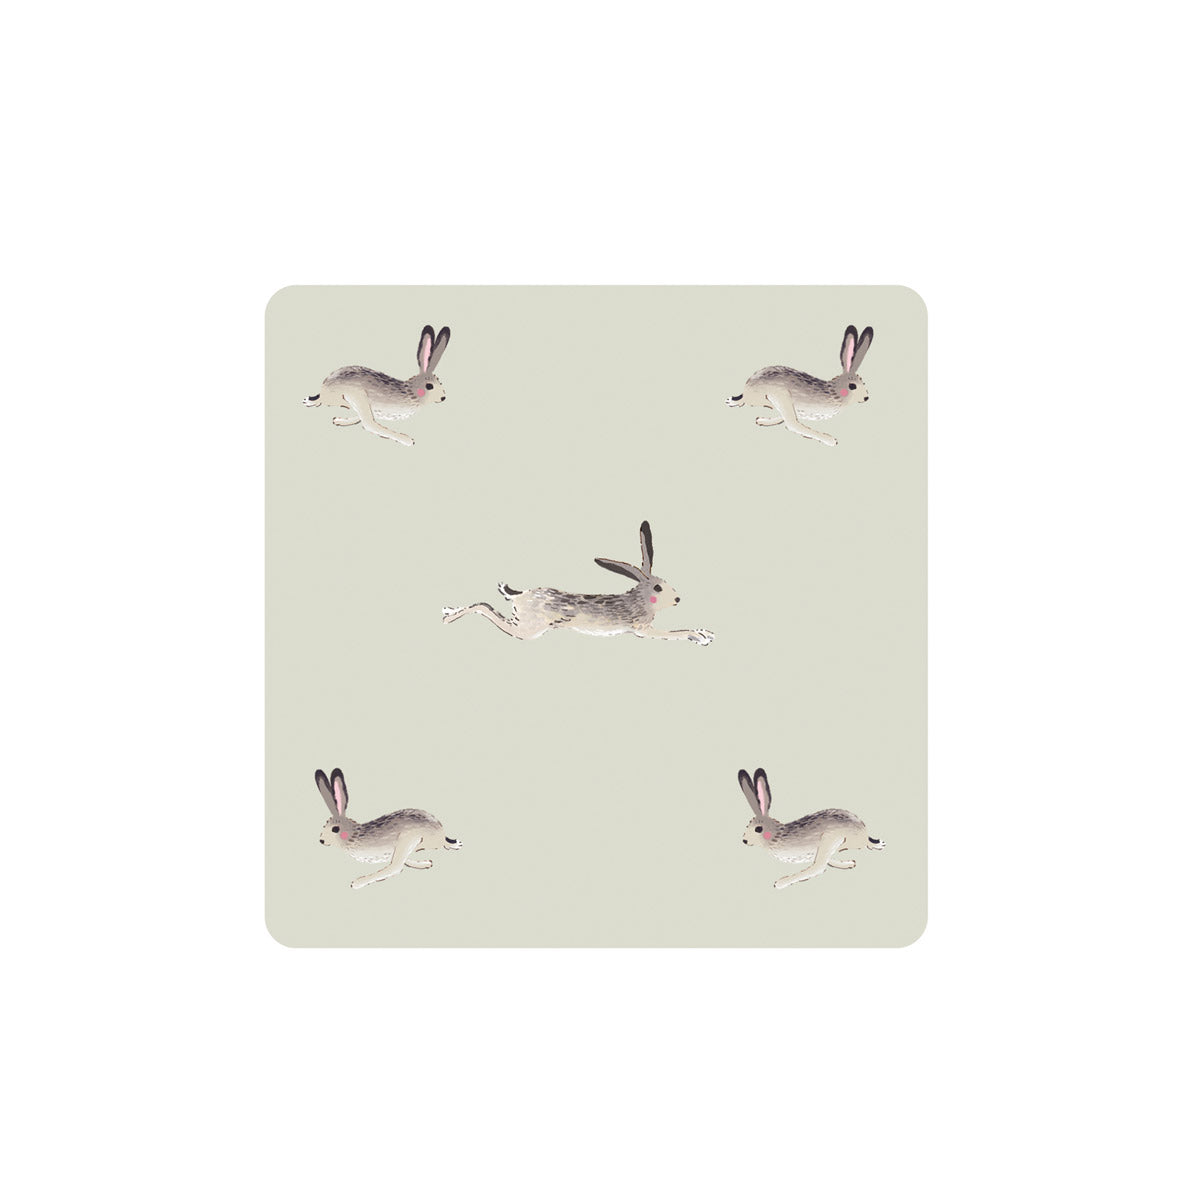 frontHare Coasters (Set of 4)